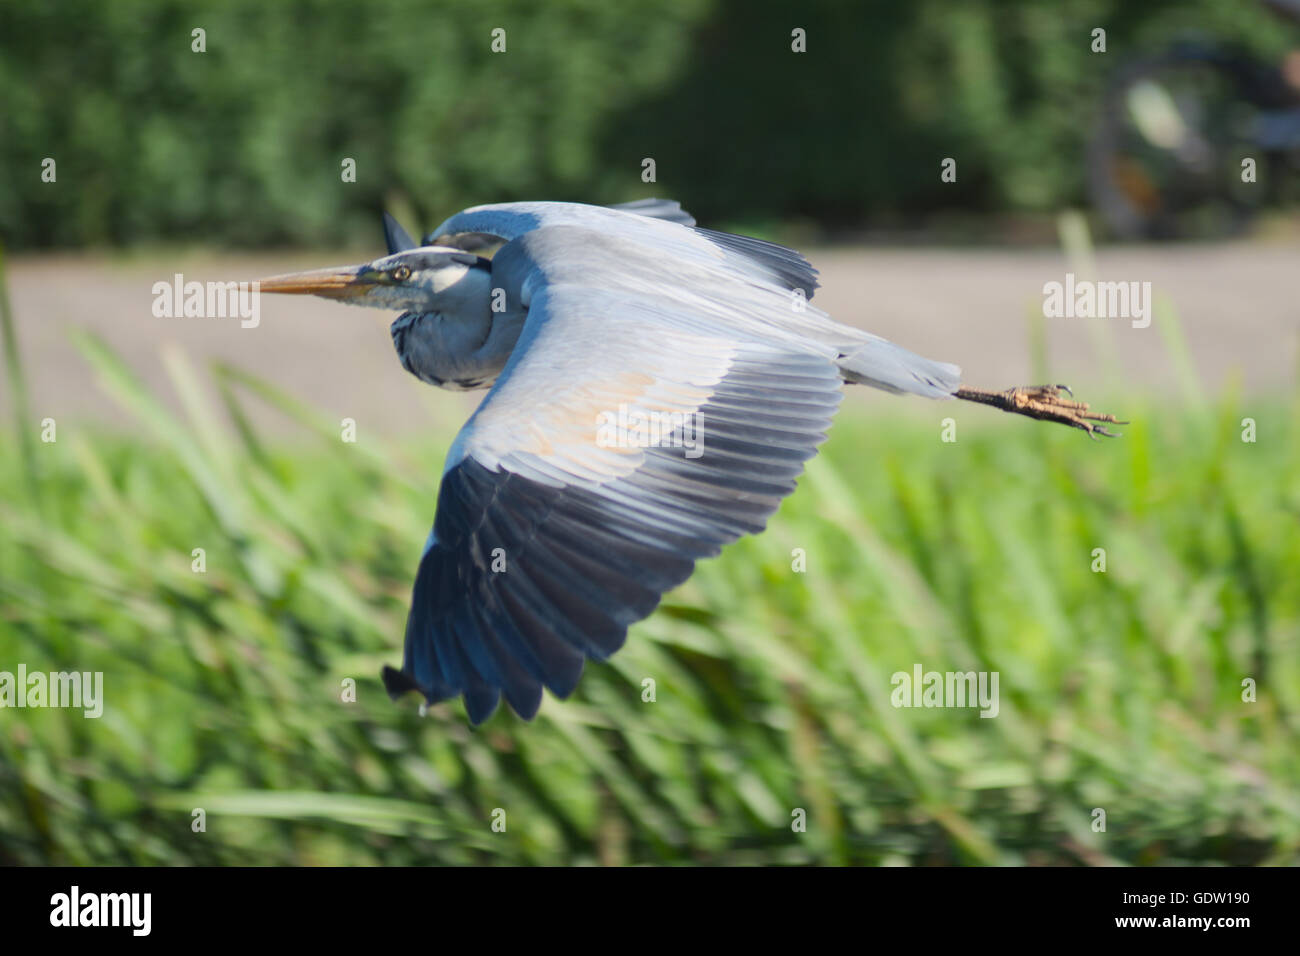 A heron flying in the air Stock Photo